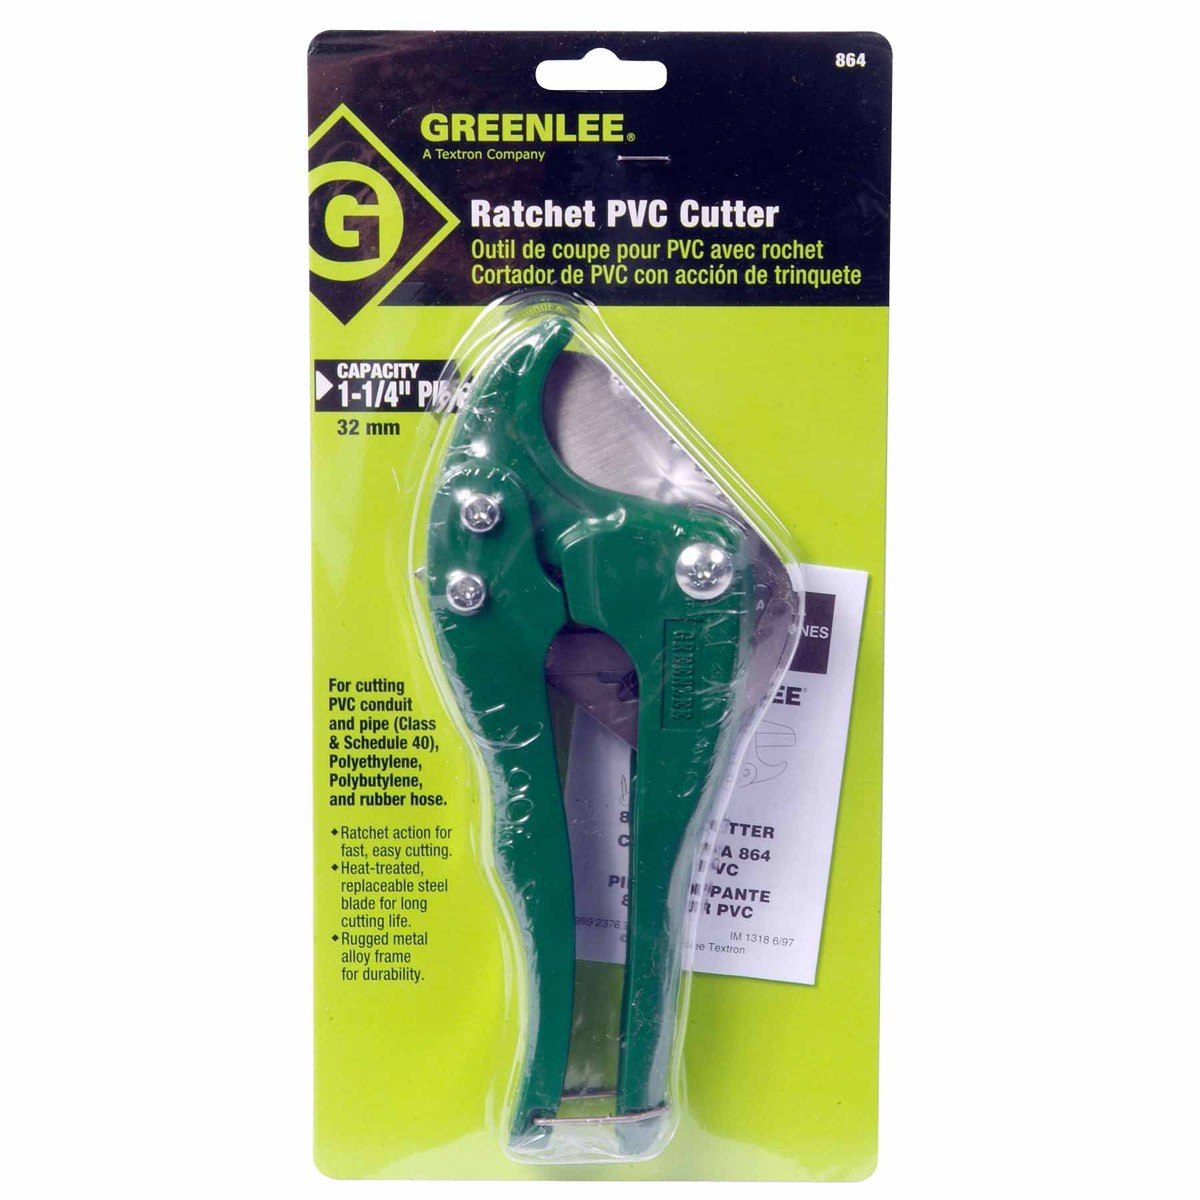 Greenlee 864 PVC Cutter for up to 1-1/4"